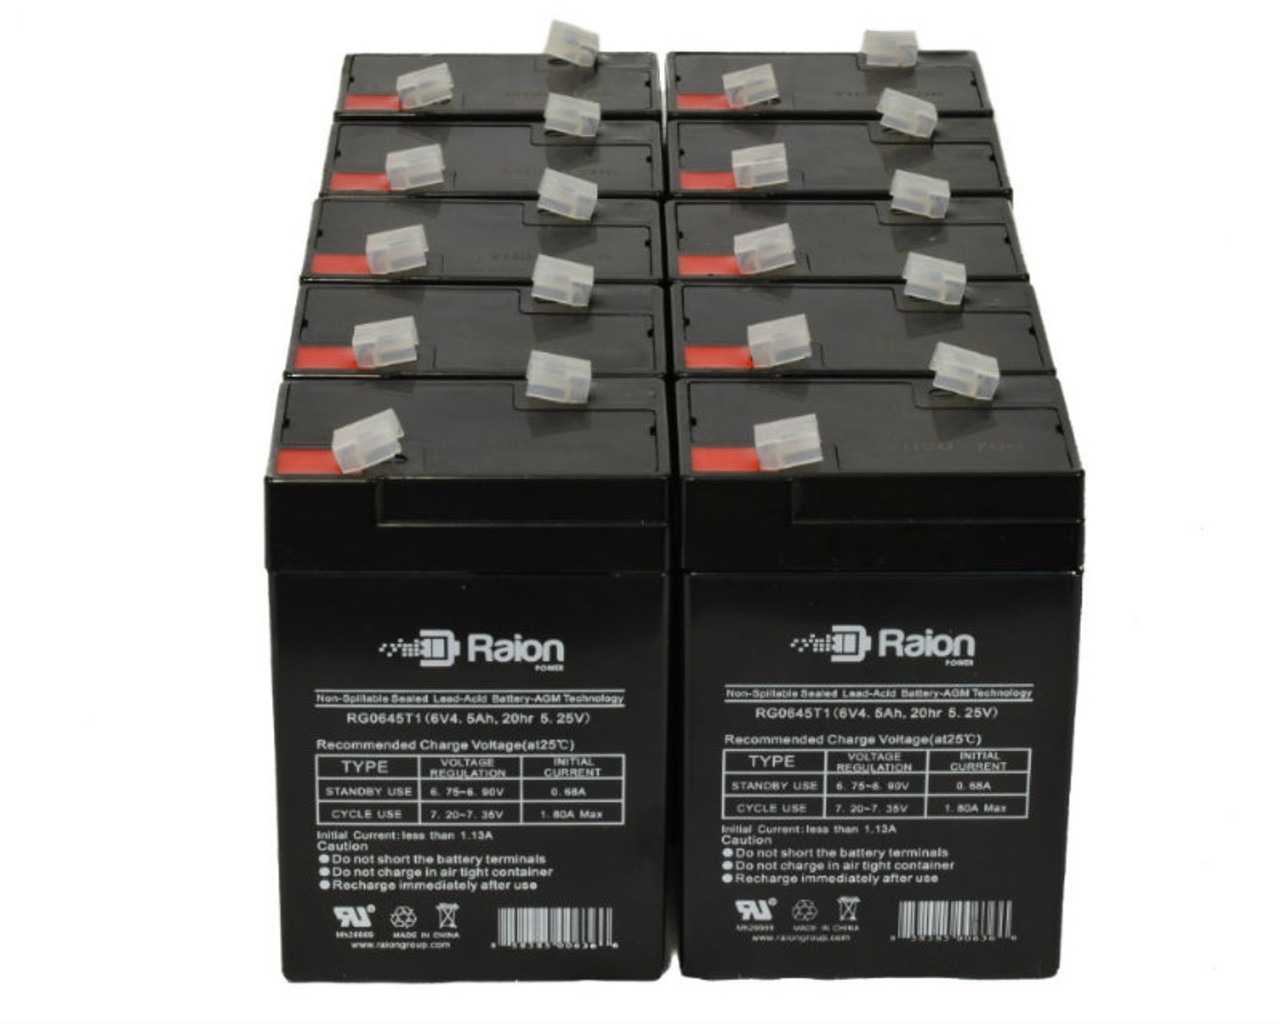 Raion Power 6 Volt 4.5Ah RG0645T1 Replacement Battery for Palma PM5A-6 - 10 Pack